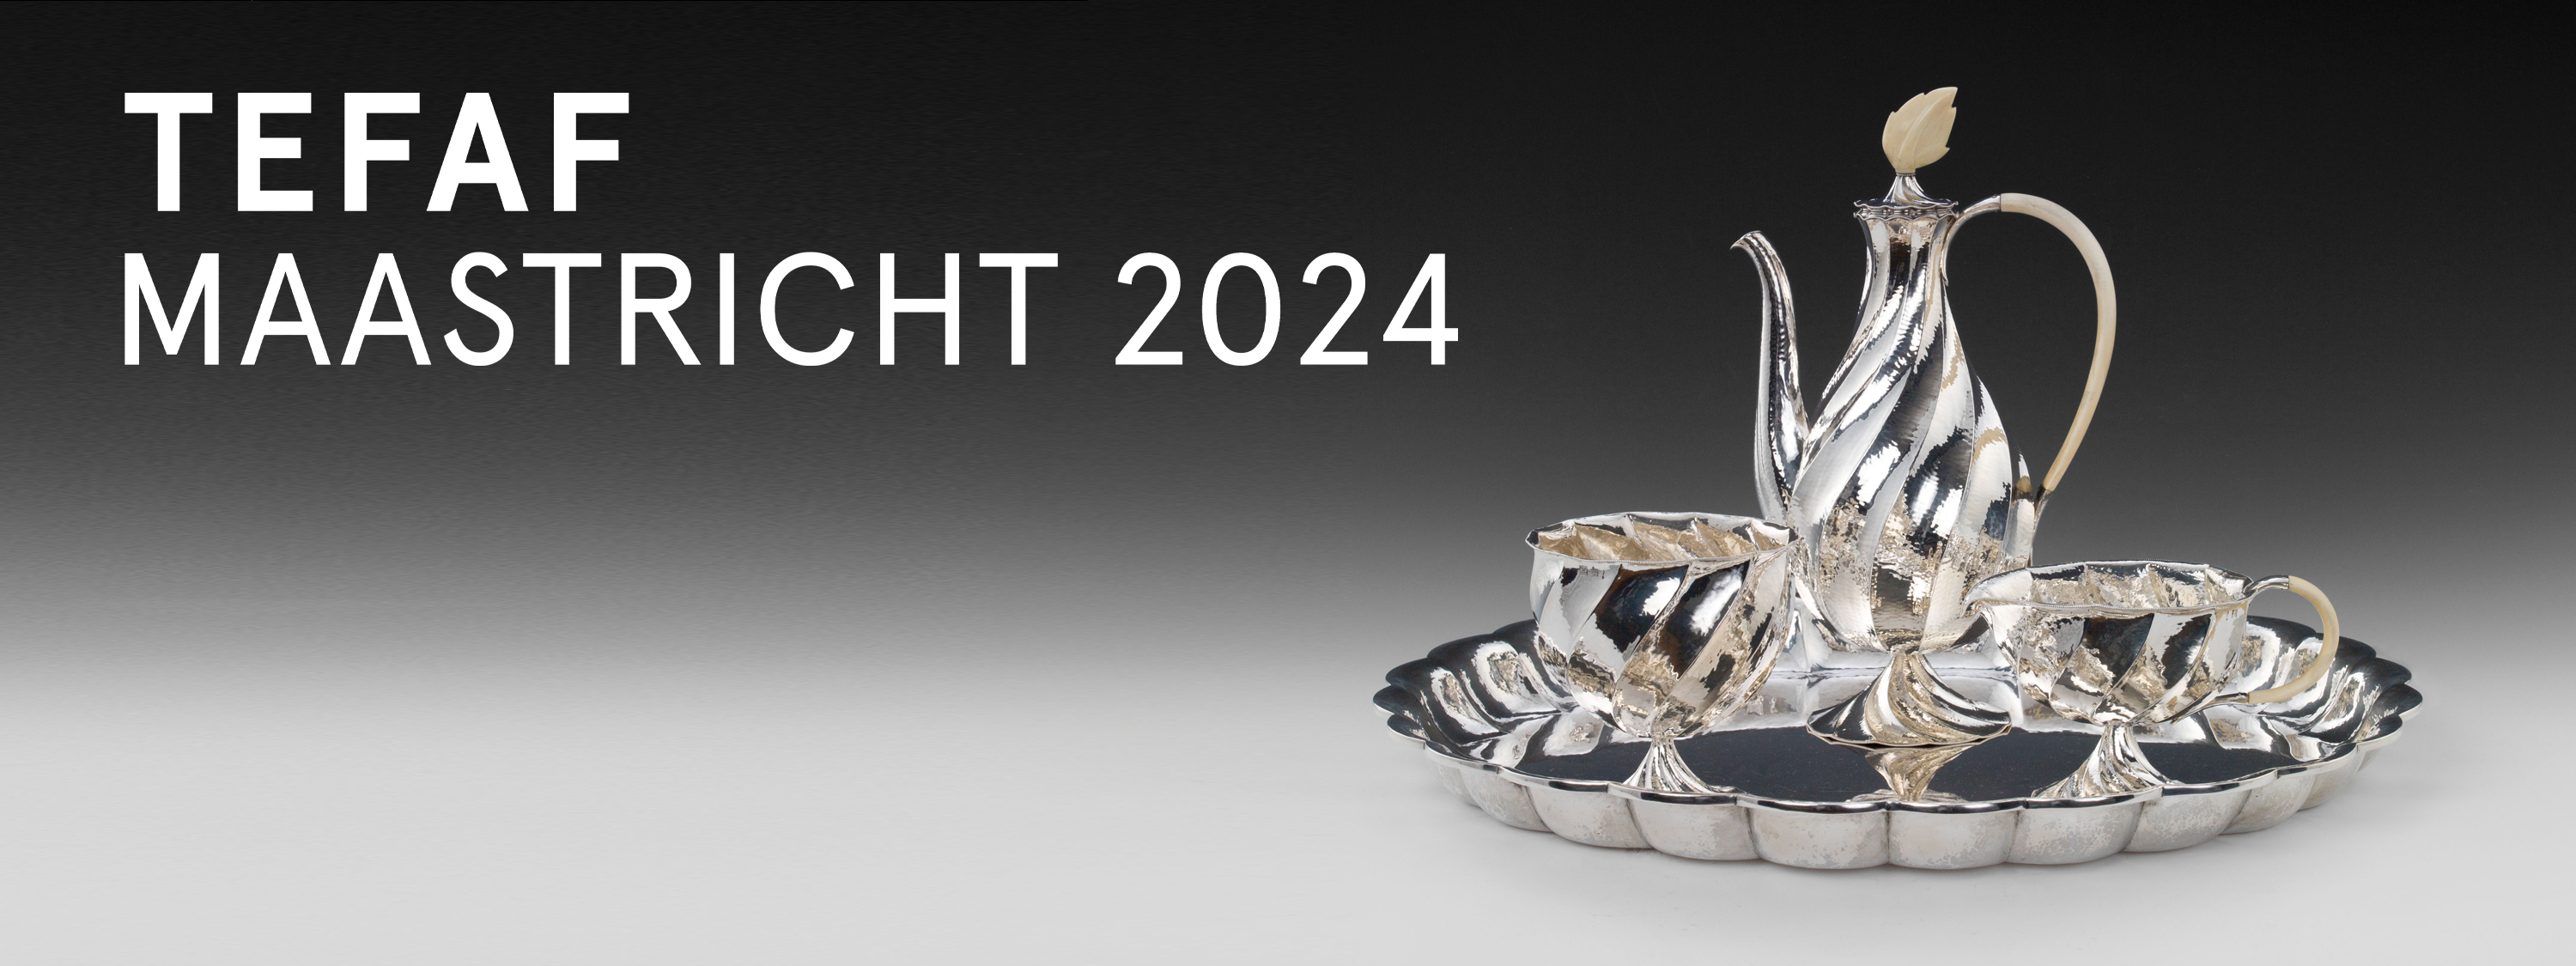 Our latest catalogue for TEFAF Maastricht 2024